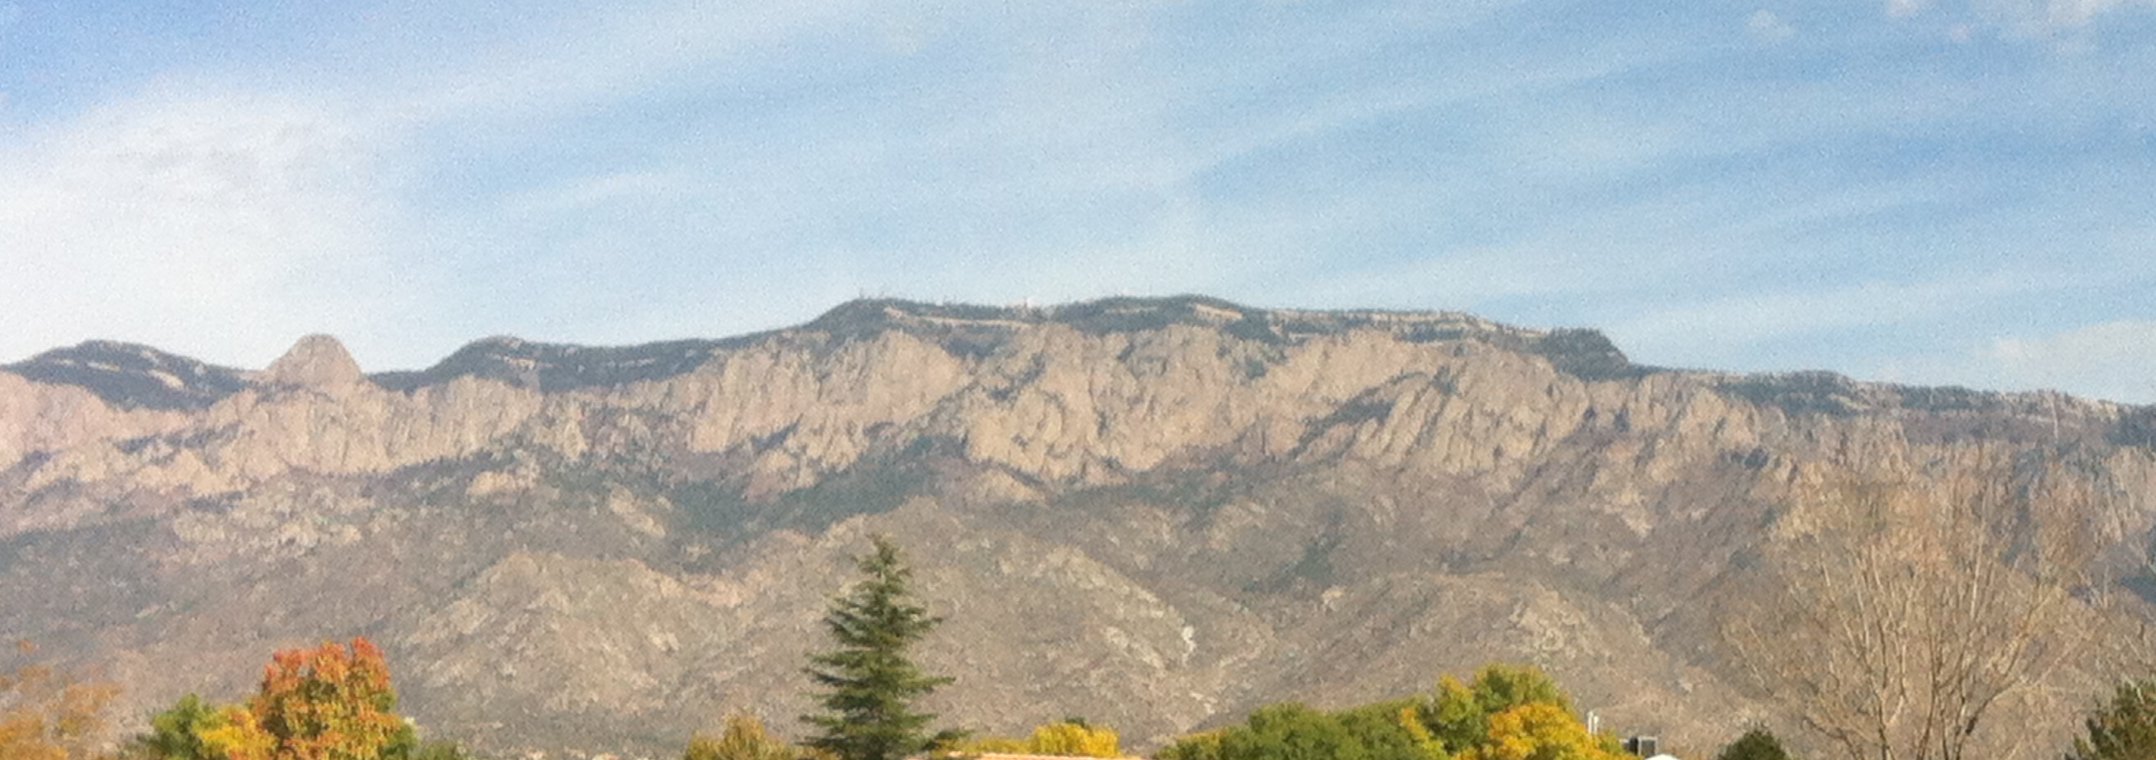 Real Estate Business under the shadow of Beautiful Sandia Mountains in Albuquerque, New Mexico